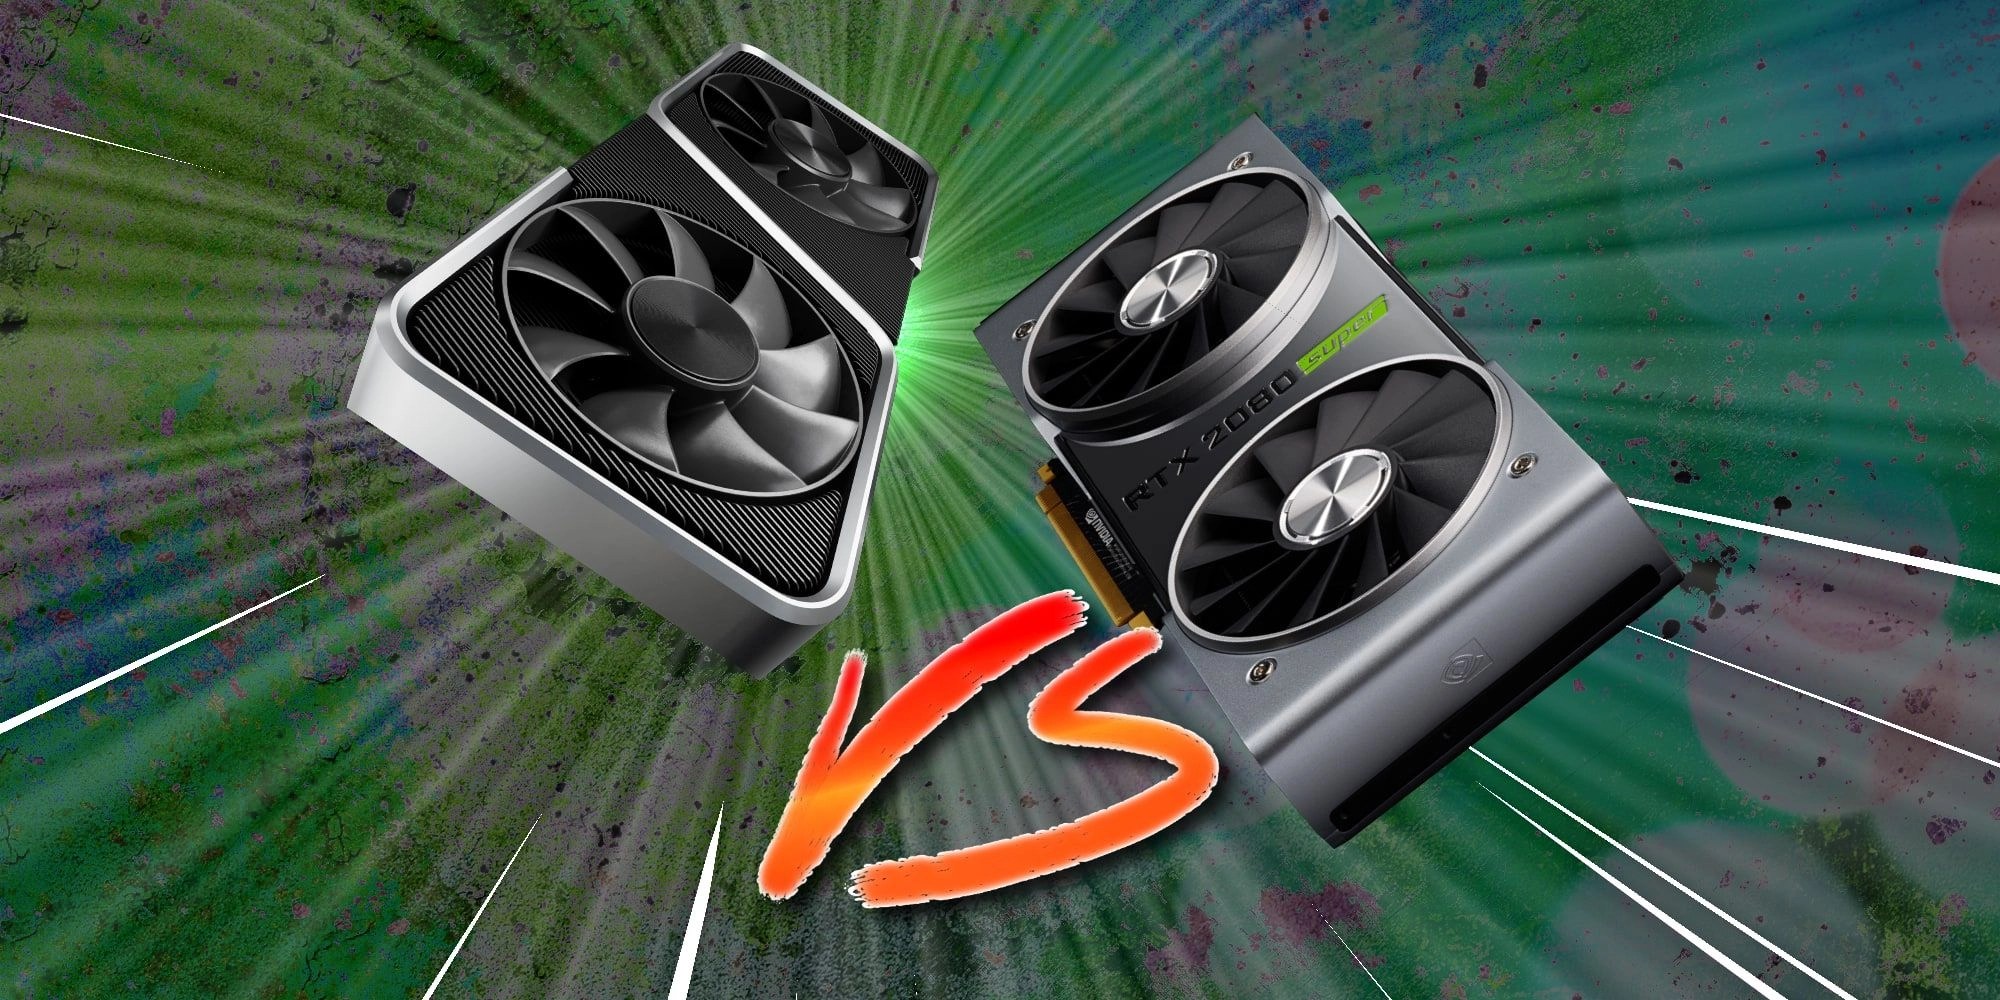 RTX 2080 Super Vs RTX 2080 Ti: Everything You Need to Know